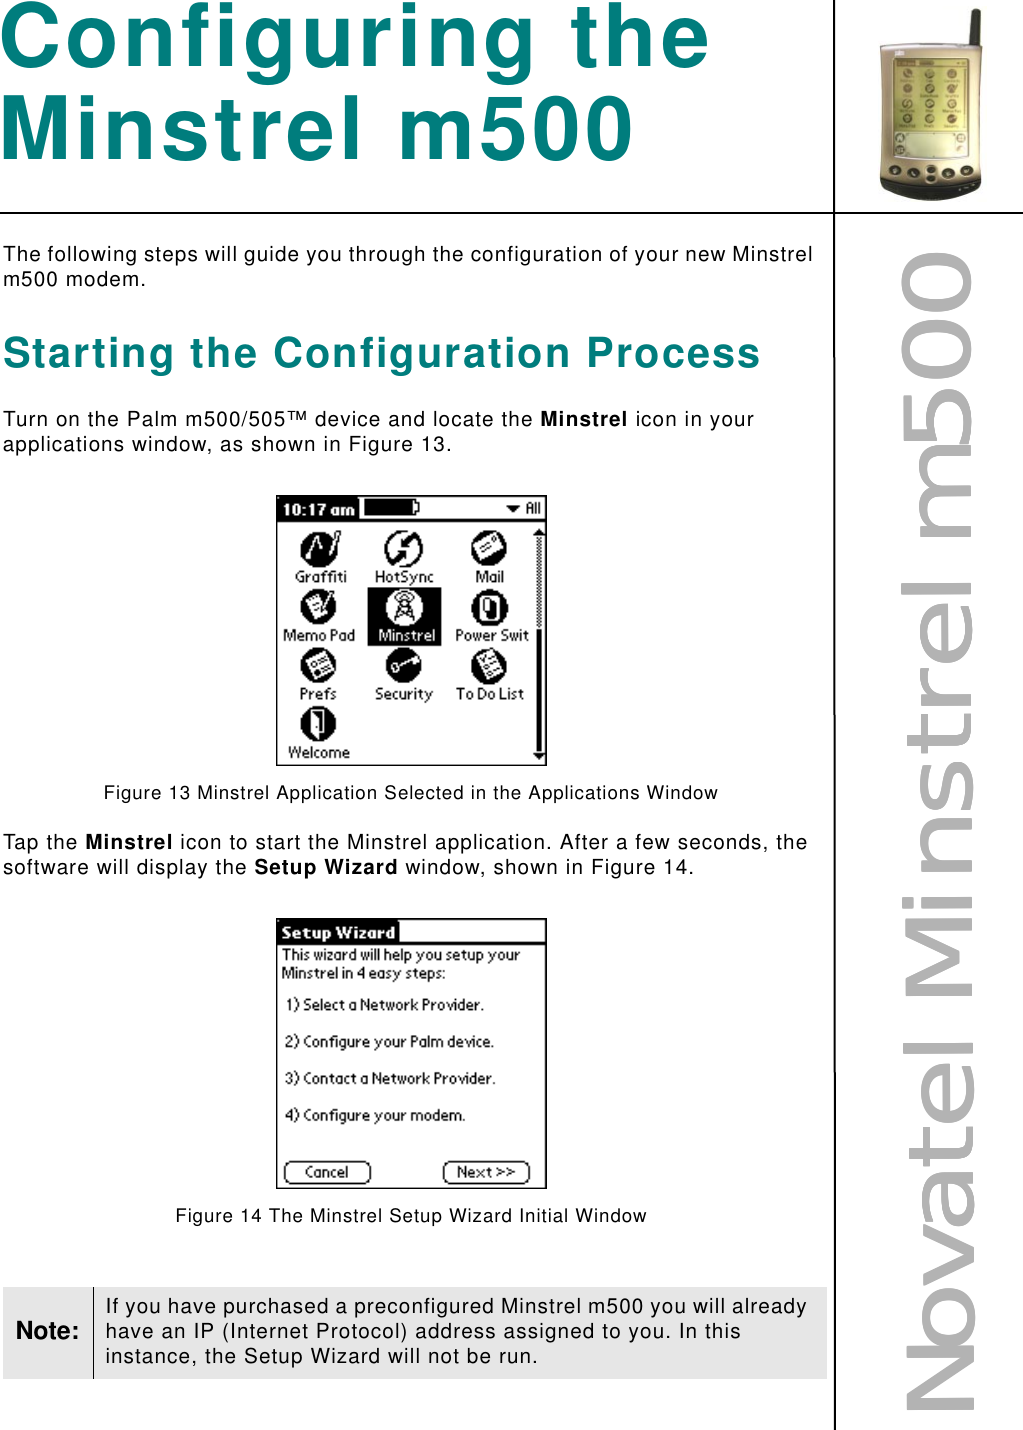 NNNNoooovvvvaaaatttteeeellll    MMMMiiiinnnnssssttttrrrreeeellll    mmmm555500000000Configuring the Minstrel m500The following steps will guide you through the configuration of your new Minstrel m500 modem.Starting the Configuration ProcessTurn on the Palm m500/505™ device and locate the Minstrel icon in your applications window, as shown in Figure 13.Figure 13 Minstrel Application Selected in the Applications WindowTap the Minstrel icon to start the Minstrel application. After a few seconds, the software will display the Setup Wizard window, shown in Figure 14.Figure 14 The Minstrel Setup Wizard Initial WindowNote: If you have purchased a preconfigured Minstrel m500 you will already have an IP (Internet Protocol) address assigned to you. In this instance, the Setup Wizard will not be run.